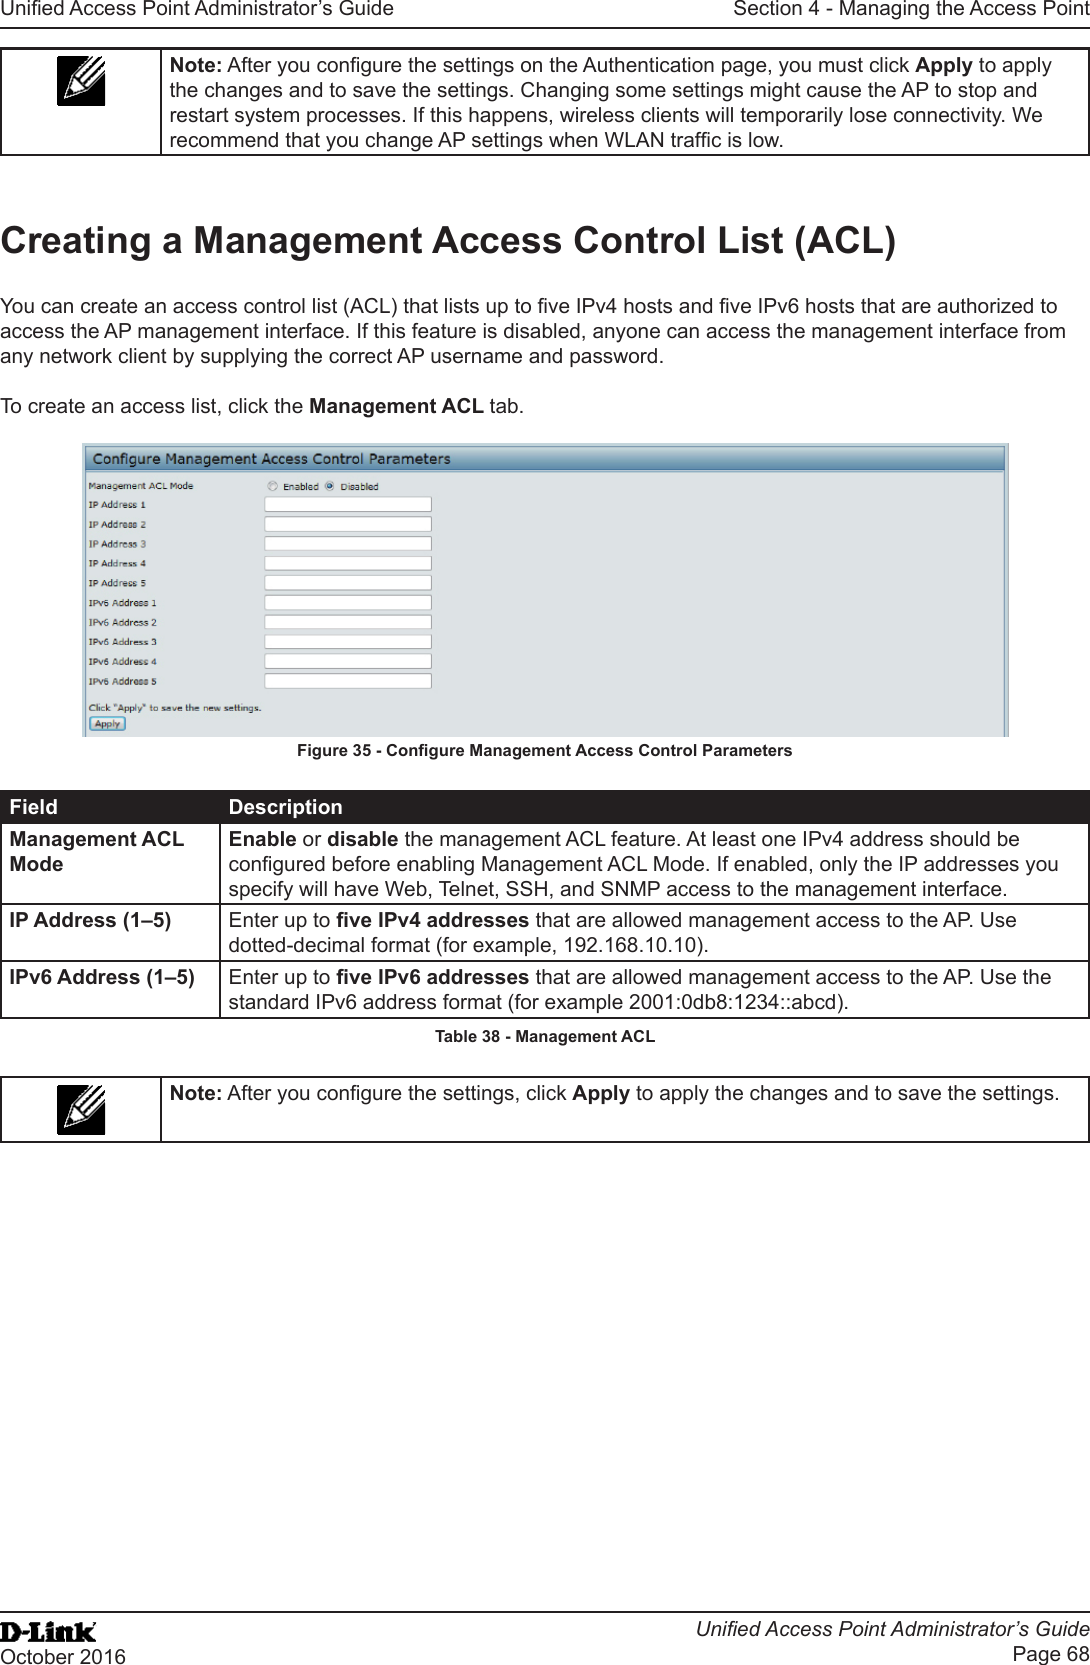 Unied Access Point Administrator’s GuideUnied Access Point Administrator’s GuidePage 68October 2016Section 4 - Managing the Access PointNote: After you congure the settings on the Authentication page, you must click Apply to apply the changes and to save the settings. Changing some settings might cause the AP to stop and restart system processes. If this happens, wireless clients will temporarily lose connectivity. We recommend that you change AP settings when WLAN trafc is low.Creating a Management Access Control List (ACL)You can create an access control list (ACL) that lists up to ve IPv4 hosts and ve IPv6 hosts that are authorized to access the AP management interface. If this feature is disabled, anyone can access the management interface from any network client by supplying the correct AP username and password.To create an access list, click the Management ACL tab.Figure 35 - Congure Management Access Control ParametersField DescriptionManagement ACL ModeEnable or disable the management ACL feature. At least one IPv4 address should be congured before enabling Management ACL Mode. If enabled, only the IP addresses you specify will have Web, Telnet, SSH, and SNMP access to the management interface.IP Address (1–5) Enter up to ve IPv4 addresses that are allowed management access to the AP. Use dotted-decimal format (for example, 192.168.10.10).IPv6 Address (1–5) Enter up to ve IPv6 addresses that are allowed management access to the AP. Use the standard IPv6 address format (for example 2001:0db8:1234::abcd).Table 38 - Management ACLNote: After you congure the settings, click Apply to apply the changes and to save the settings.